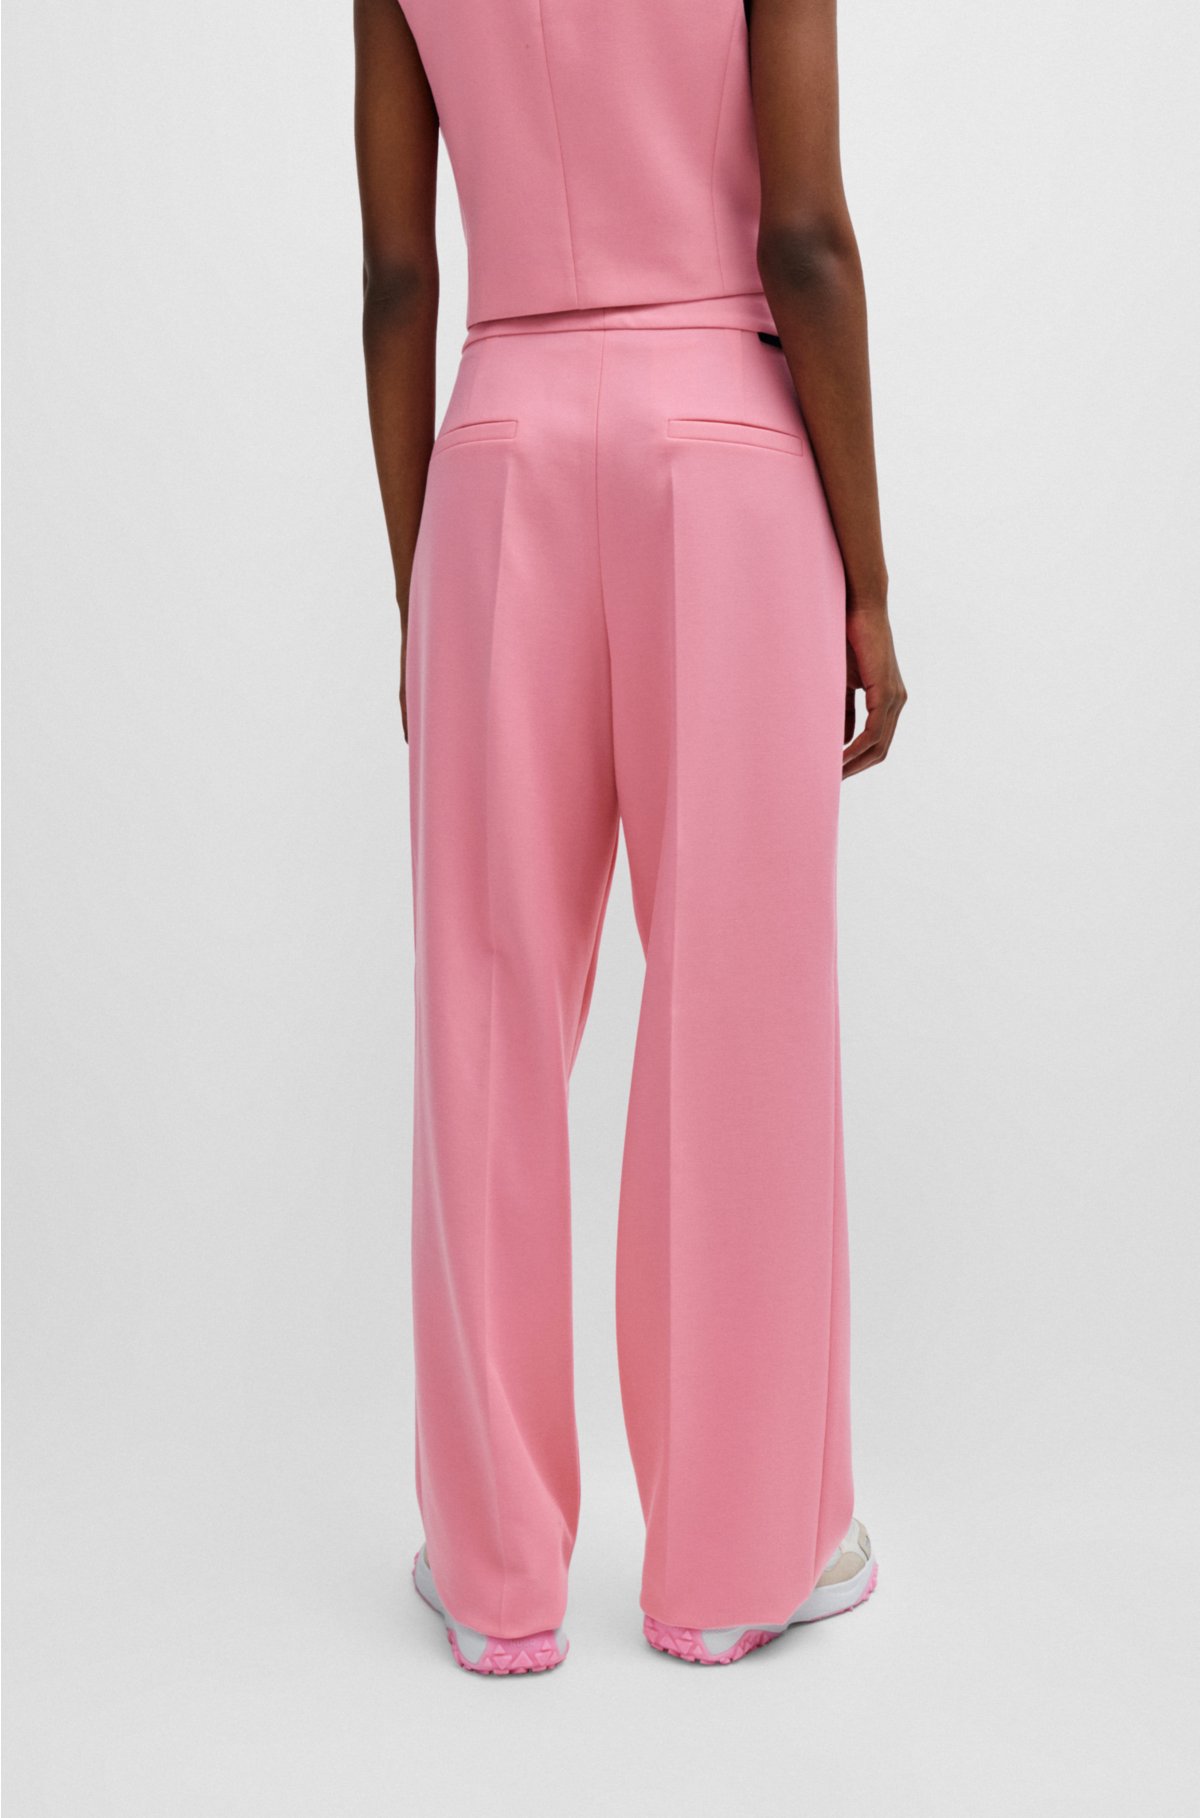 Relaxed-fit trousers in stretch fabric with front pleats, light pink